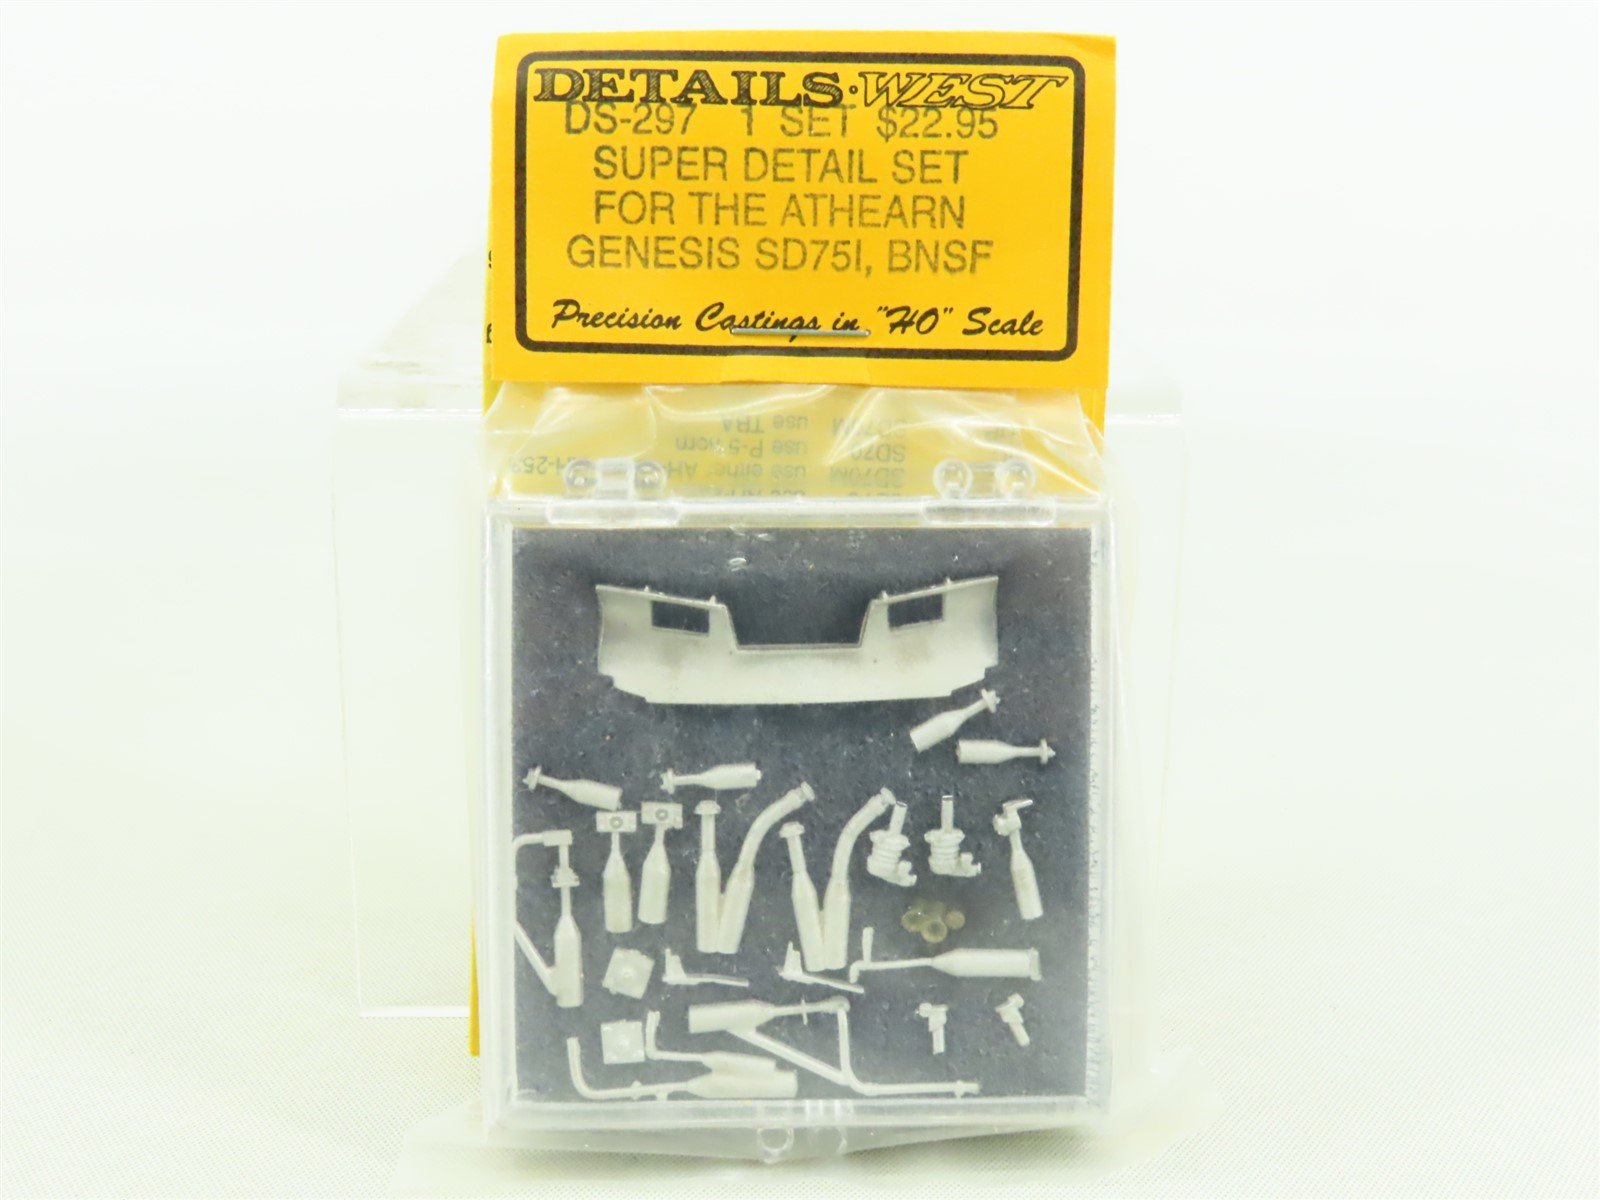 HO Details West DS-297 Super Detail Kit for Athearn Genesis BNSF SD75I Diesels